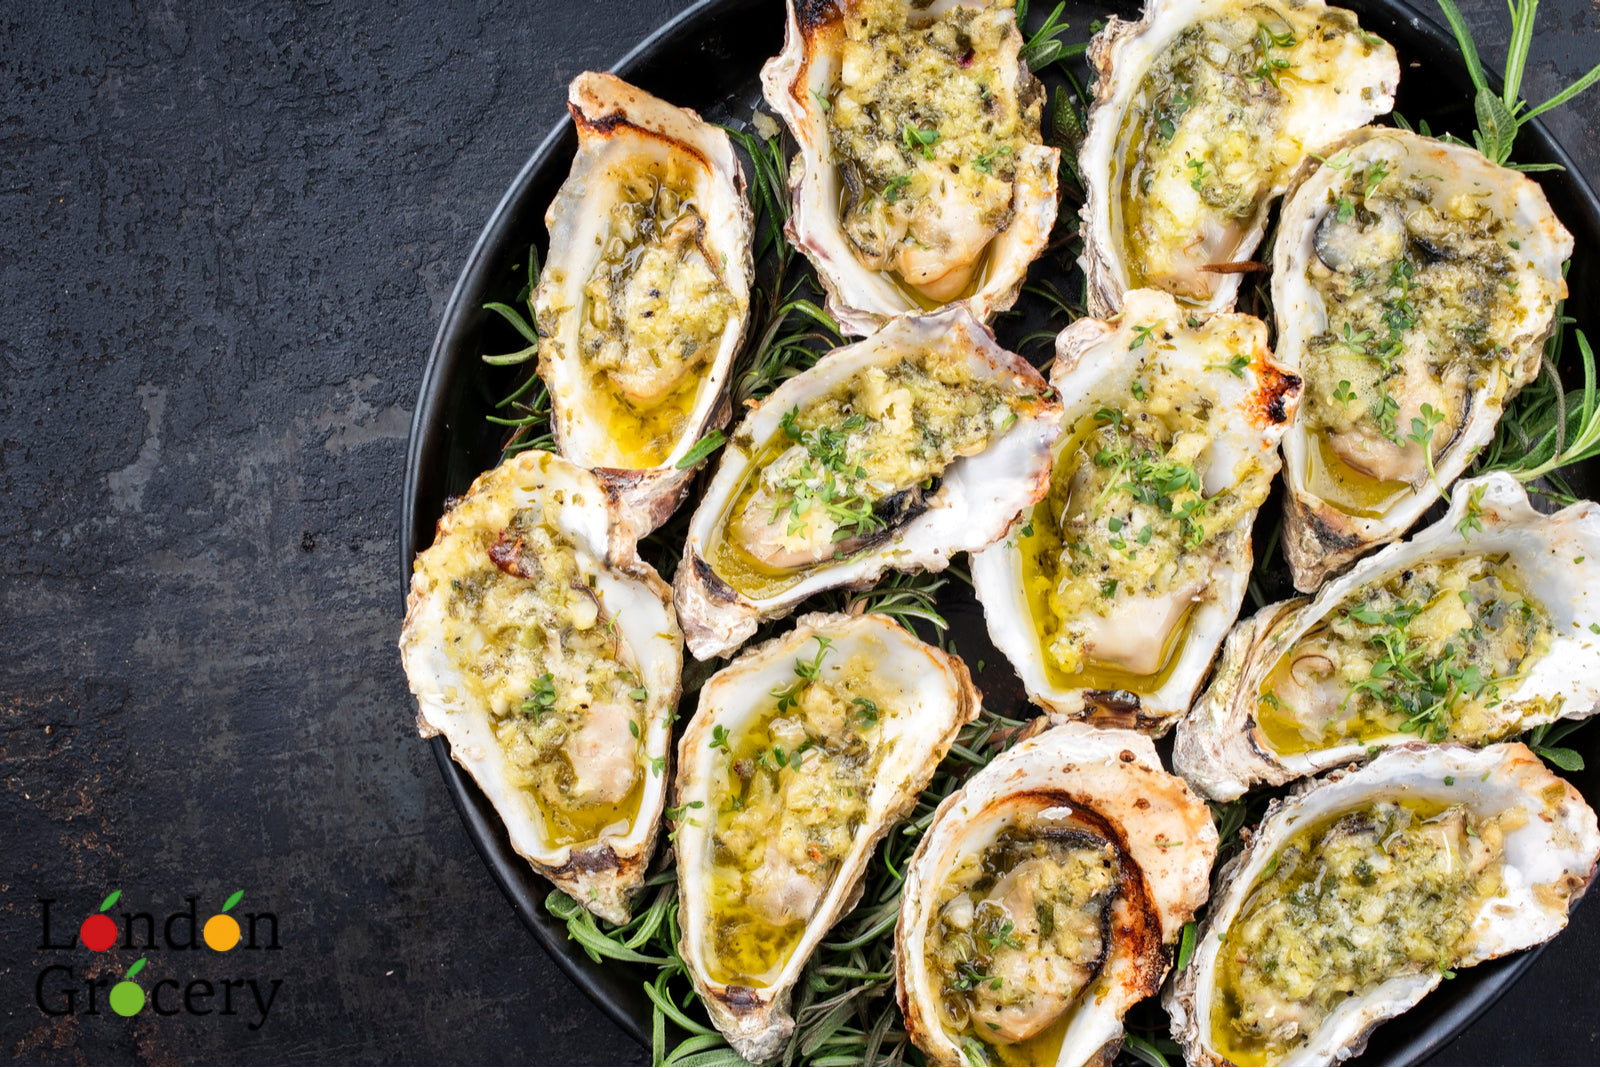 Buy Fresh Oysters Online